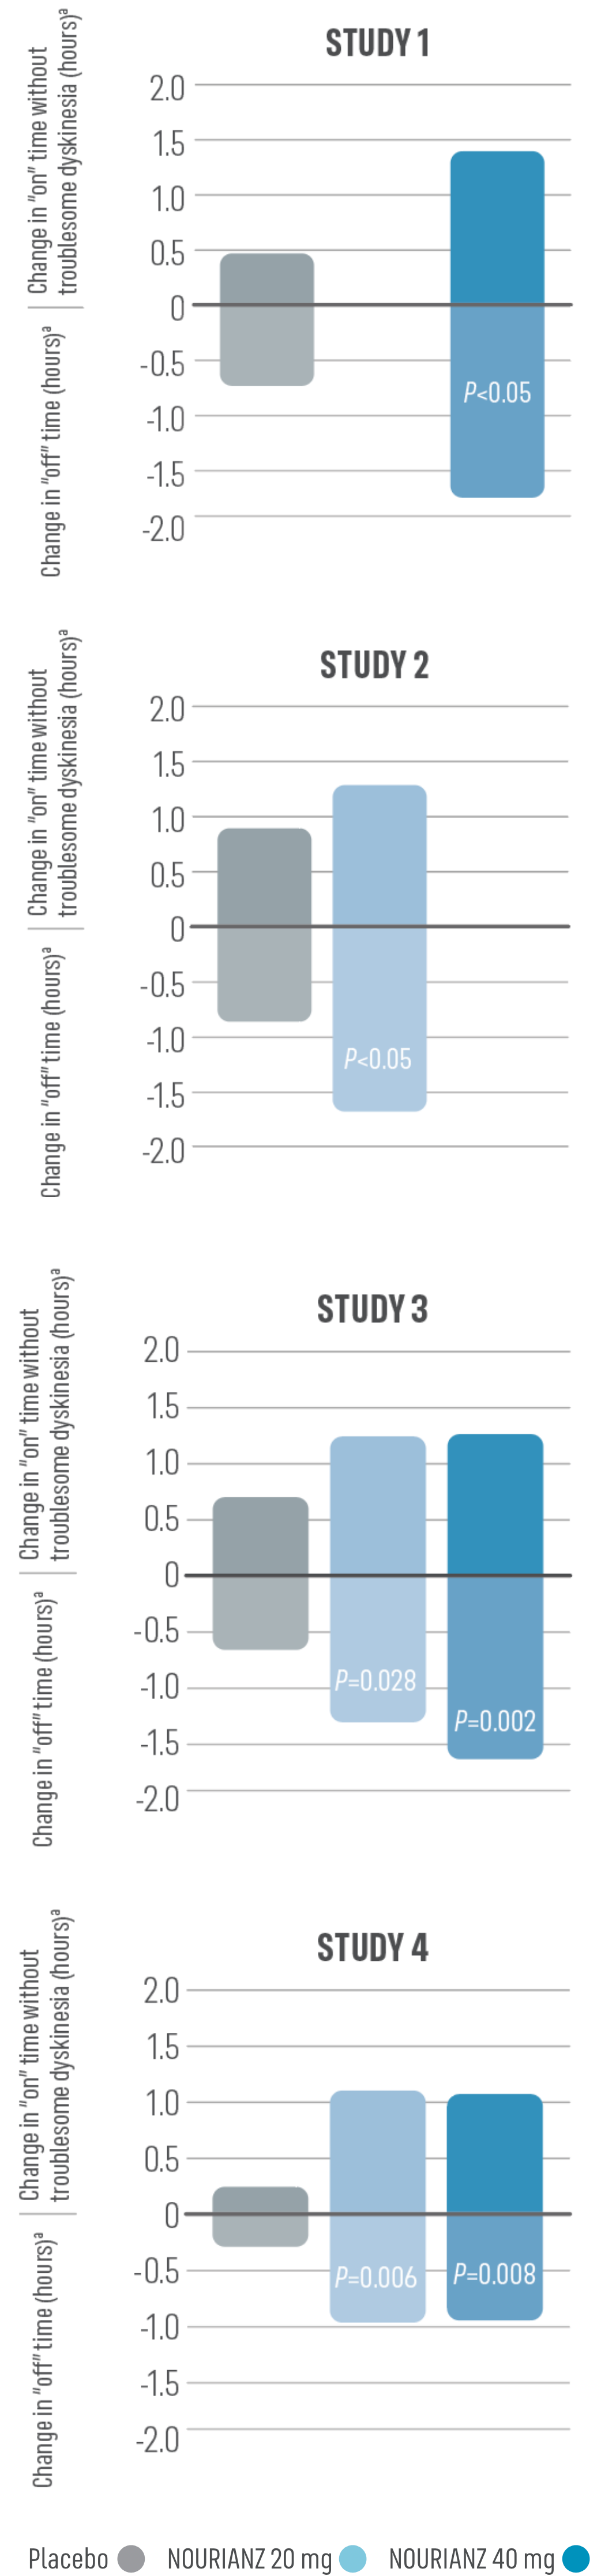 Bar chart shows NOURIANZ® (istradefylline) adjunctive therapy reduced “off” time and increased good “on” time in all 4 studies